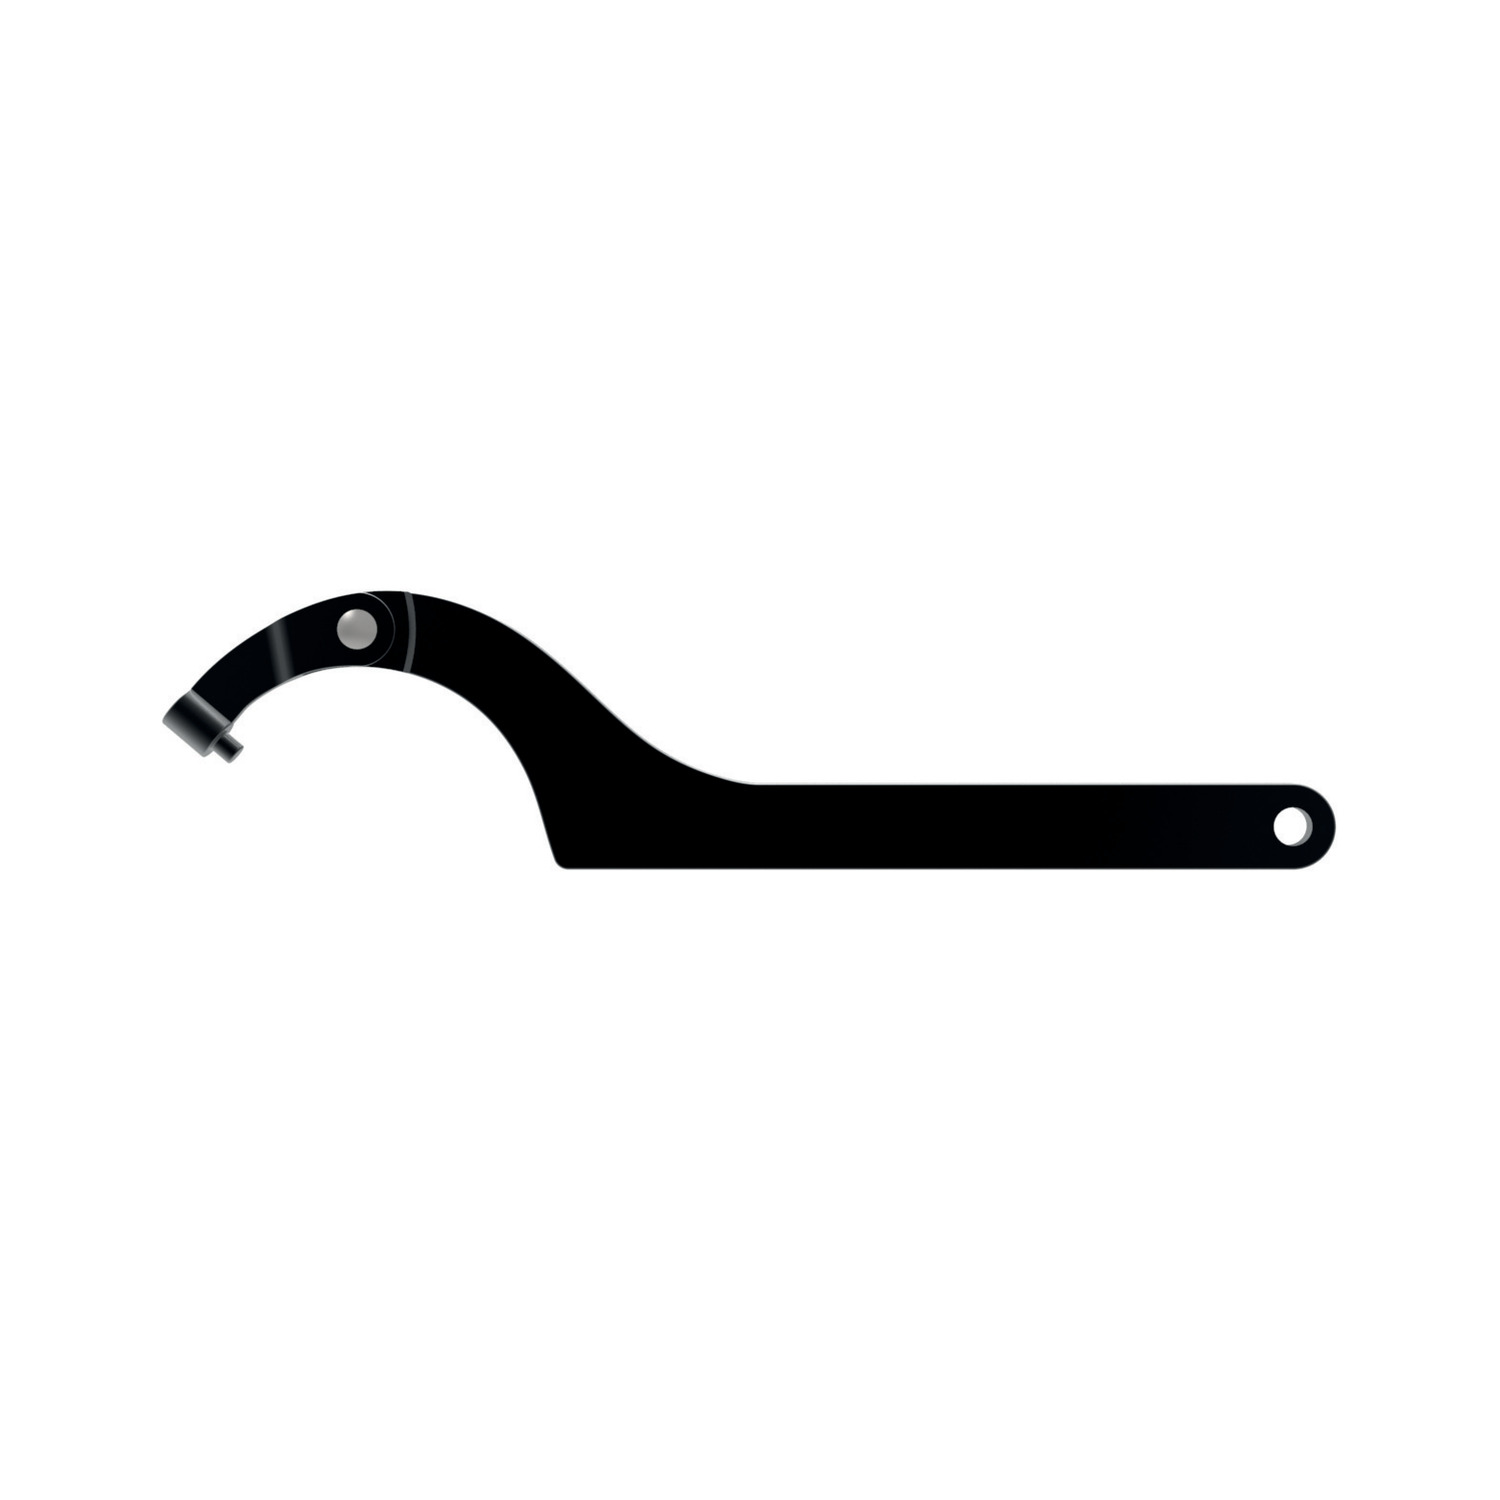 95151.W0035 Hook Spanners, With Pin Nose - Steel. Blackened - 20-35 - 2,5 x - 135